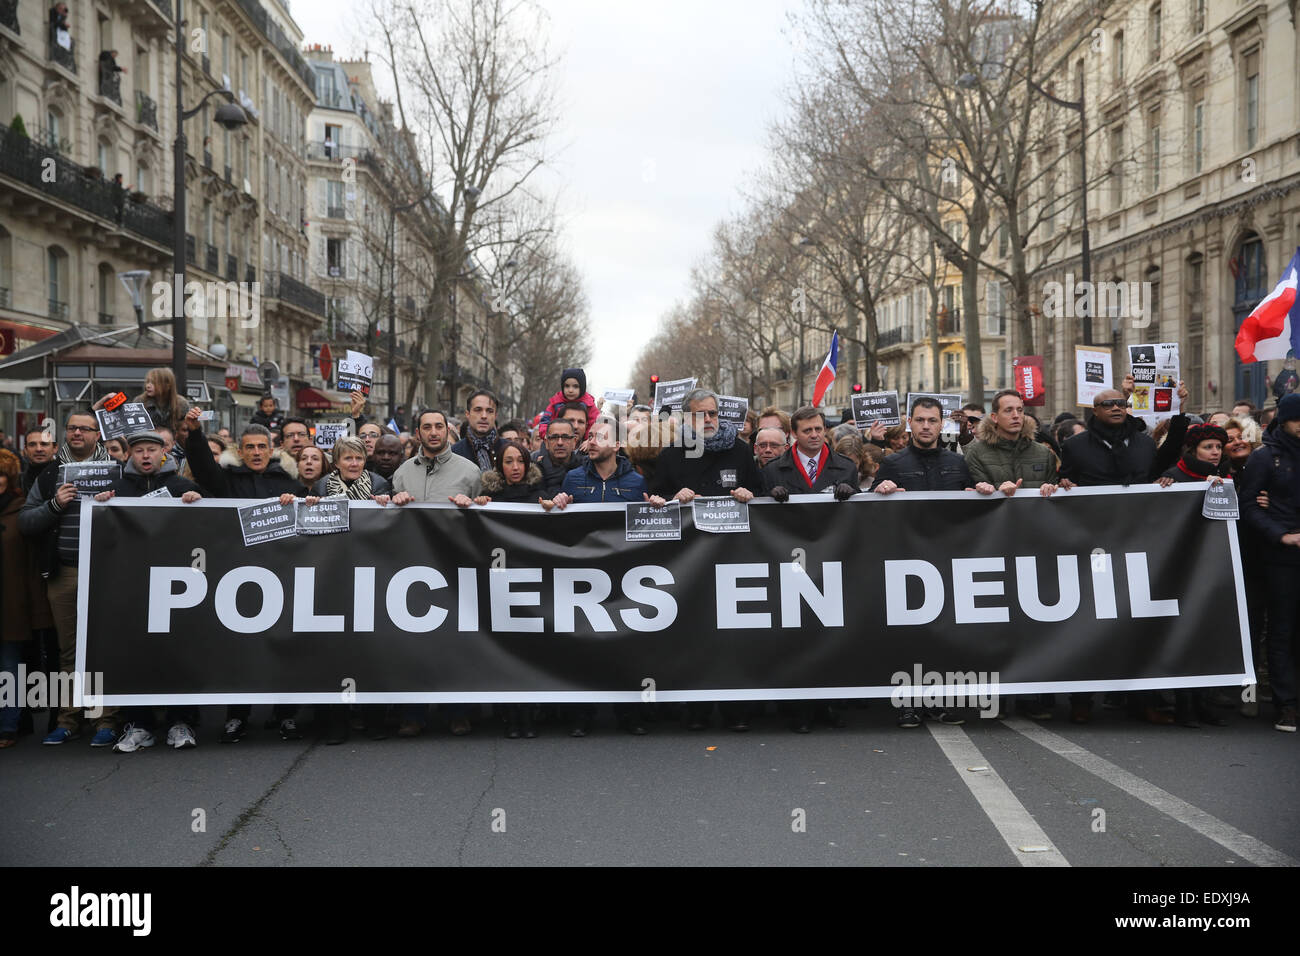 People hold up a sign which reads 'Policiers en deuil' (Police in mourning) as they gather for a march against terrorism in Paris, France on 11 January 2015. Several European heads of state joined a manifestation to express their solidarity following the recent terrorist attacks in France and to commemorate the victims of the attack on the French Charlie Hebdo satirical magazine and a kosher supermarket in Paris. Photo: Kay Nietfeld/dpa Stock Photo